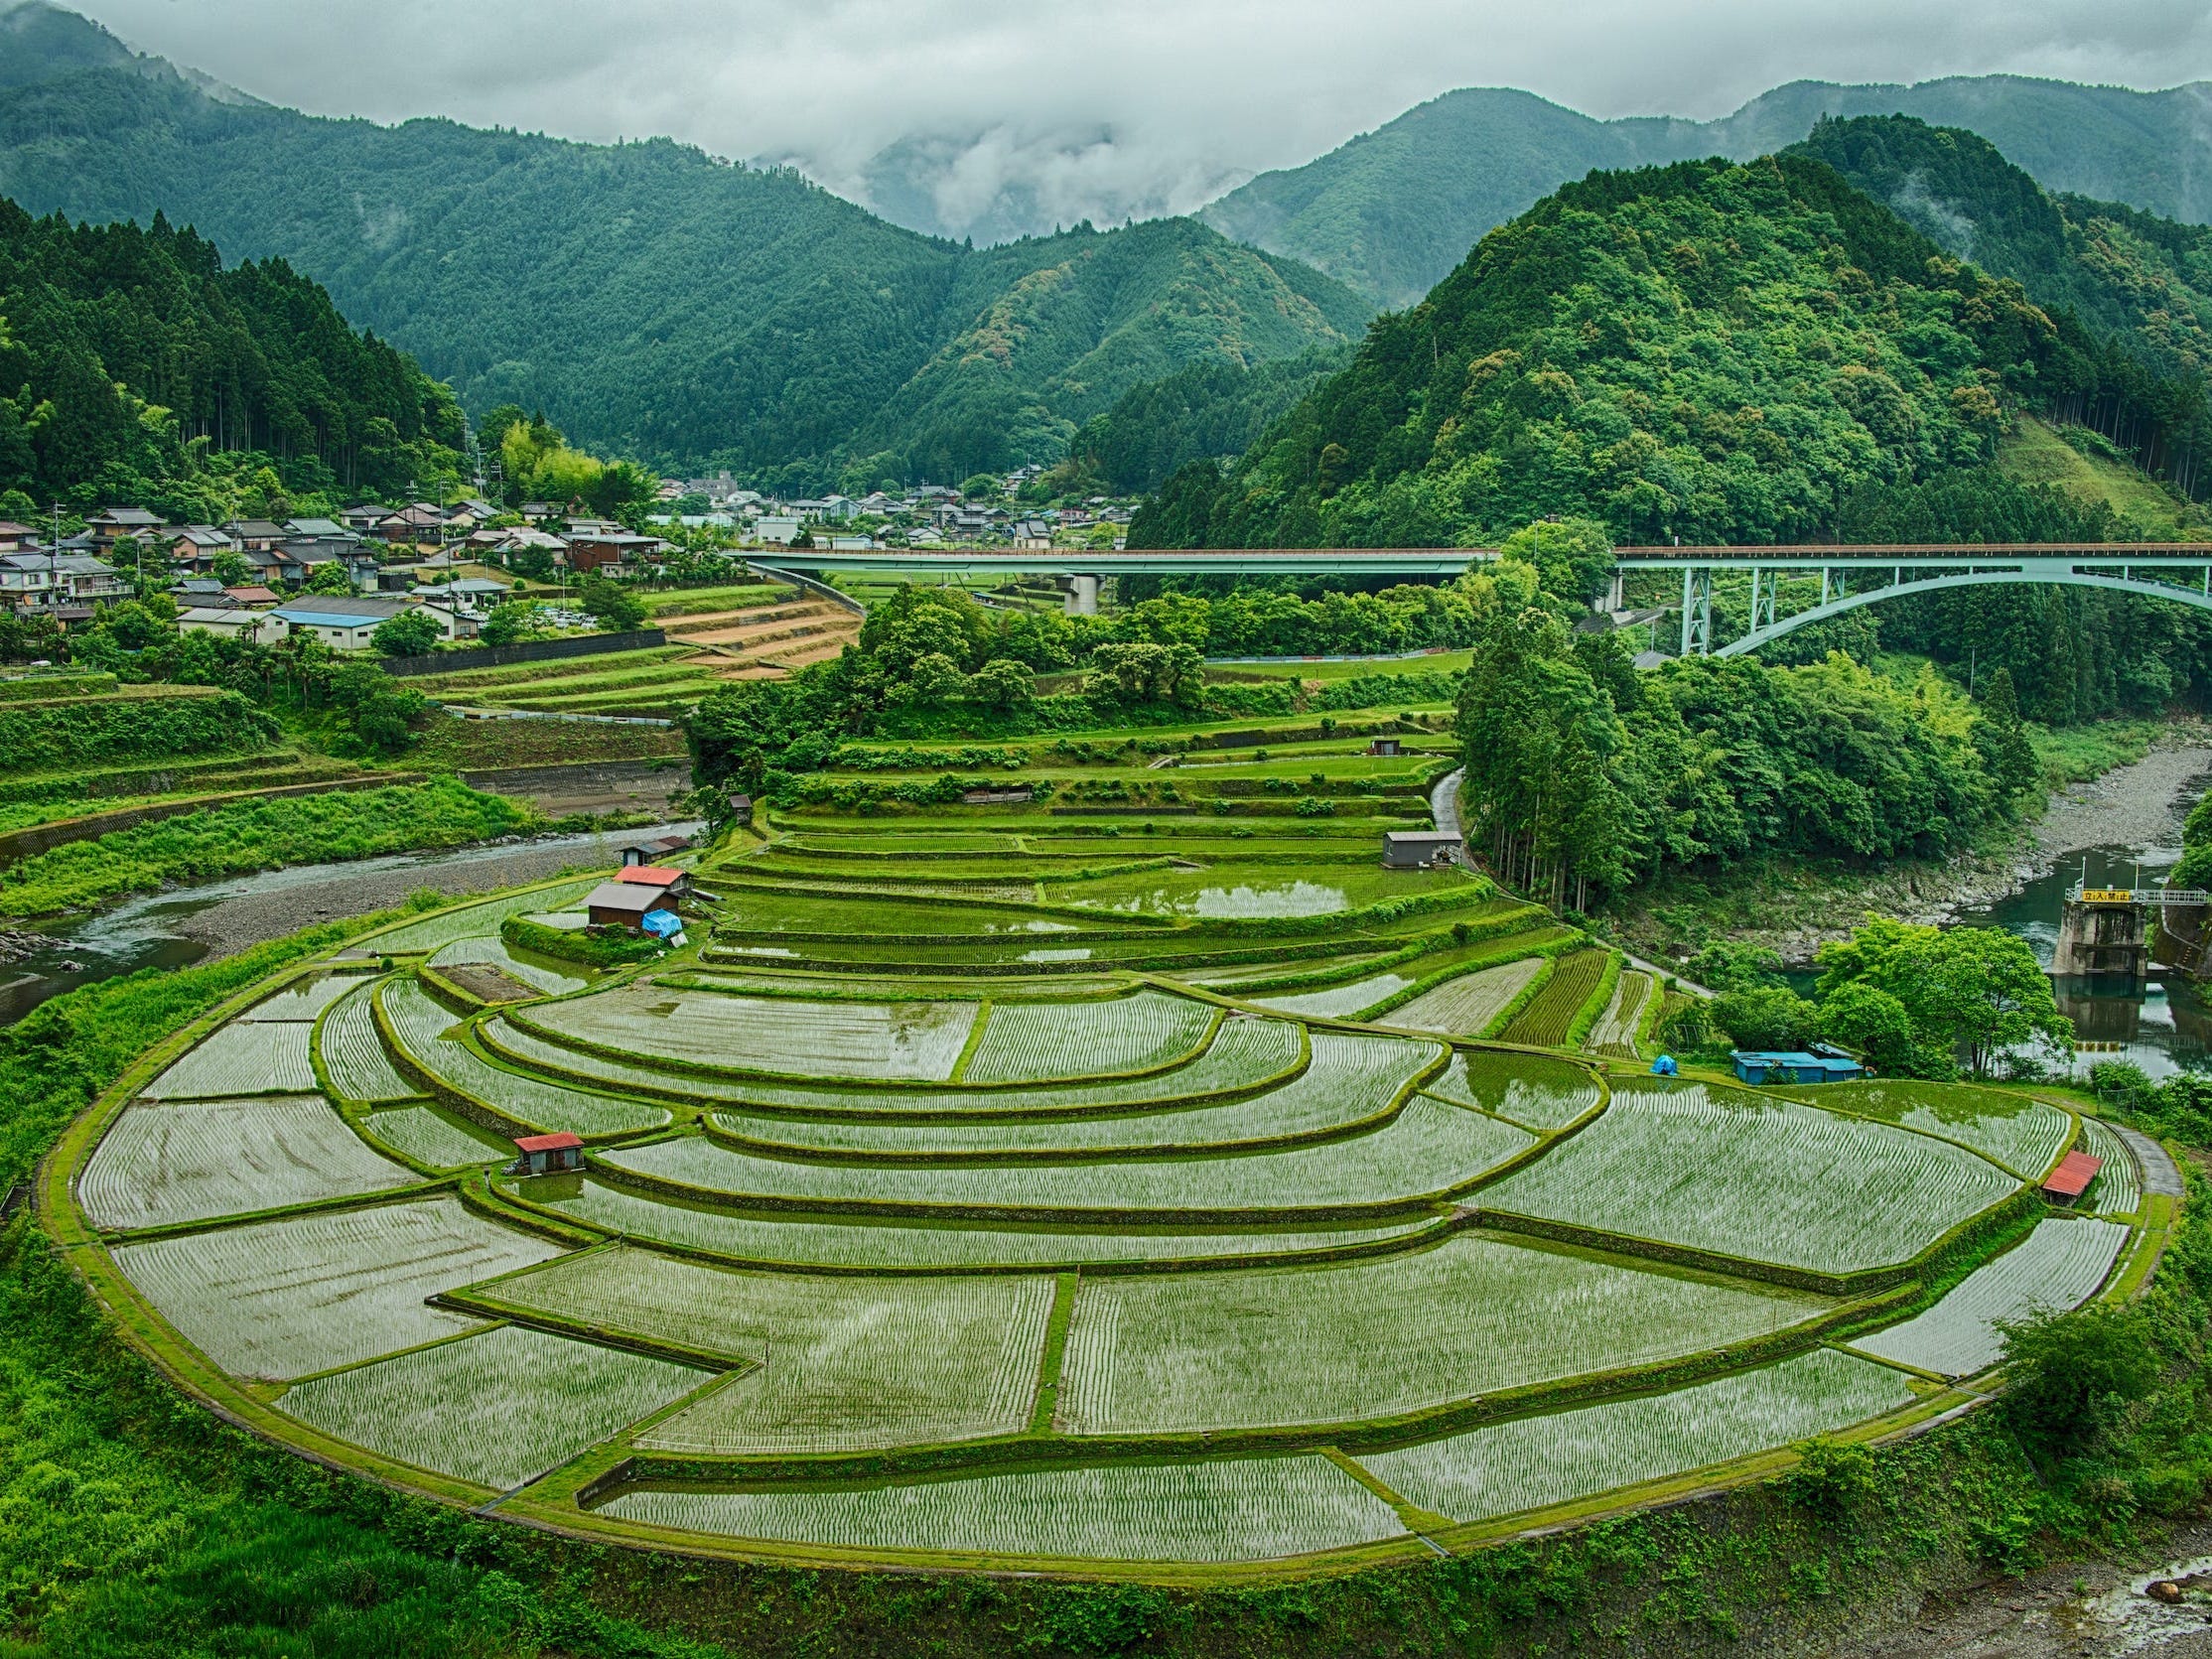 This quiet valley with rice terraces is virtually unknown to anyone except locals. Several shades of green can be seen in this beautiful and misty place. With a small village where the townsfolk live in. The mountains in the background tower over it.